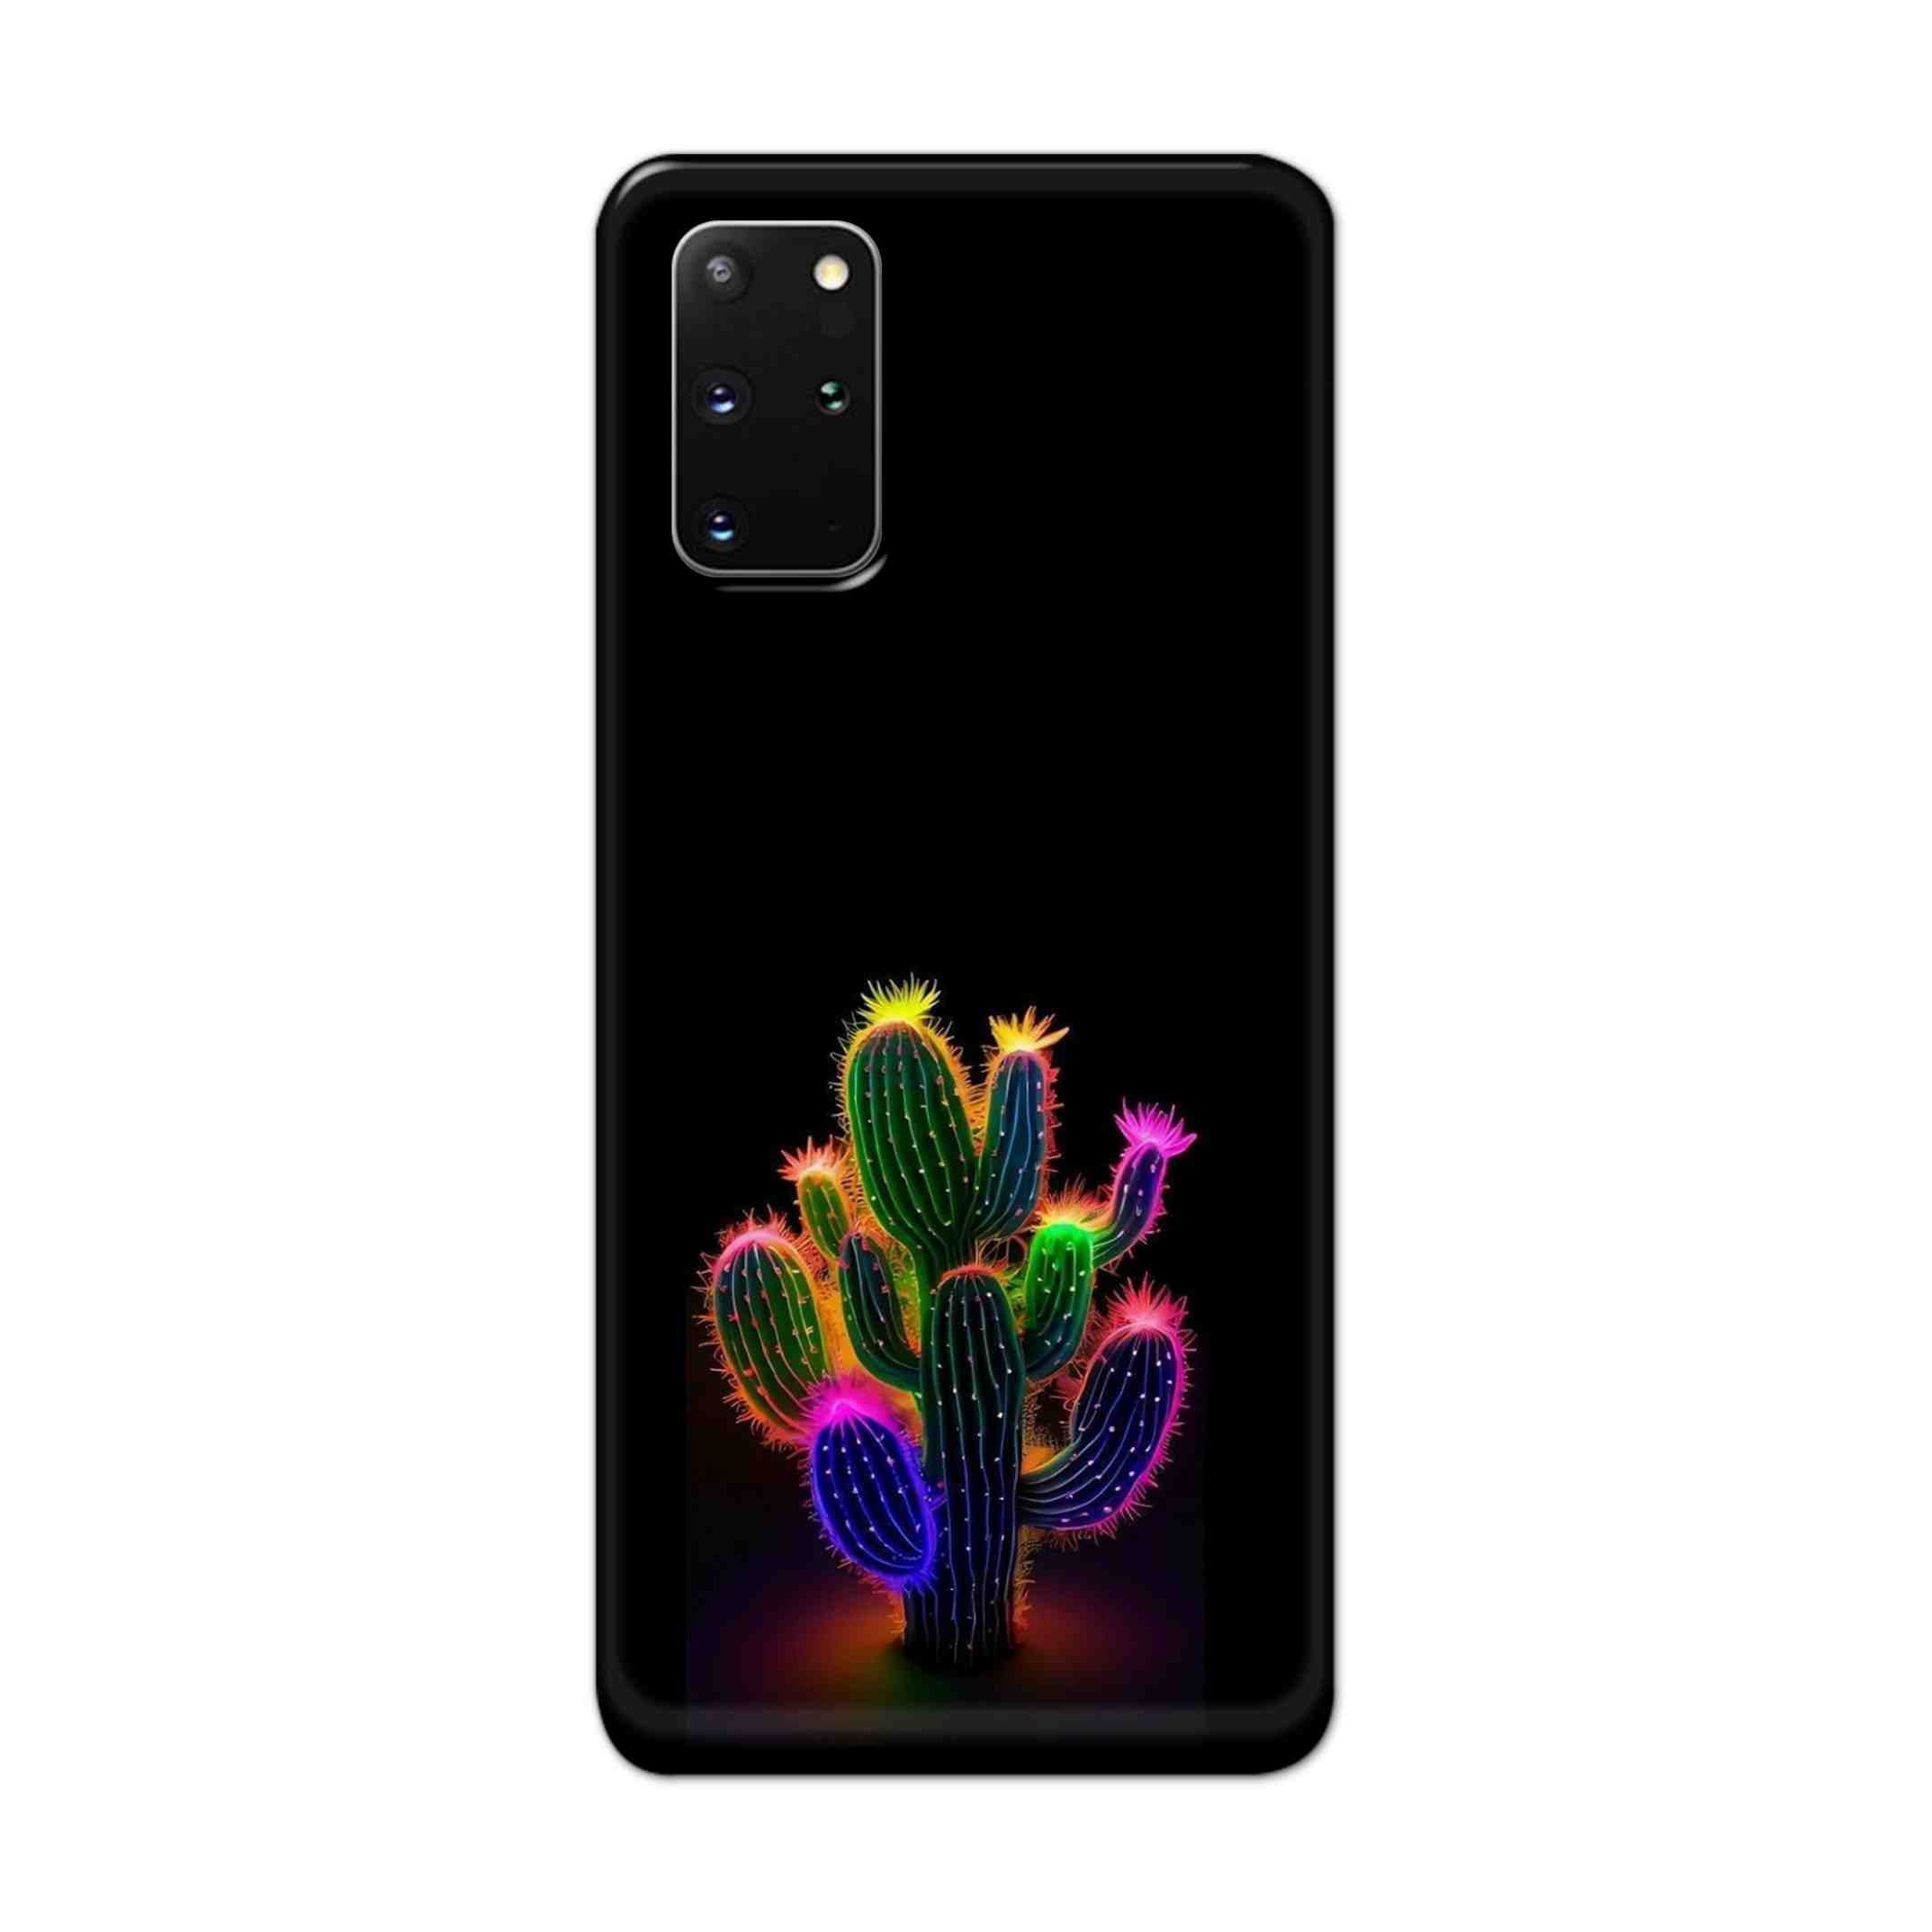 Buy Neon Flower Hard Back Mobile Phone Case Cover For Samsung Galaxy S20 Plus Online